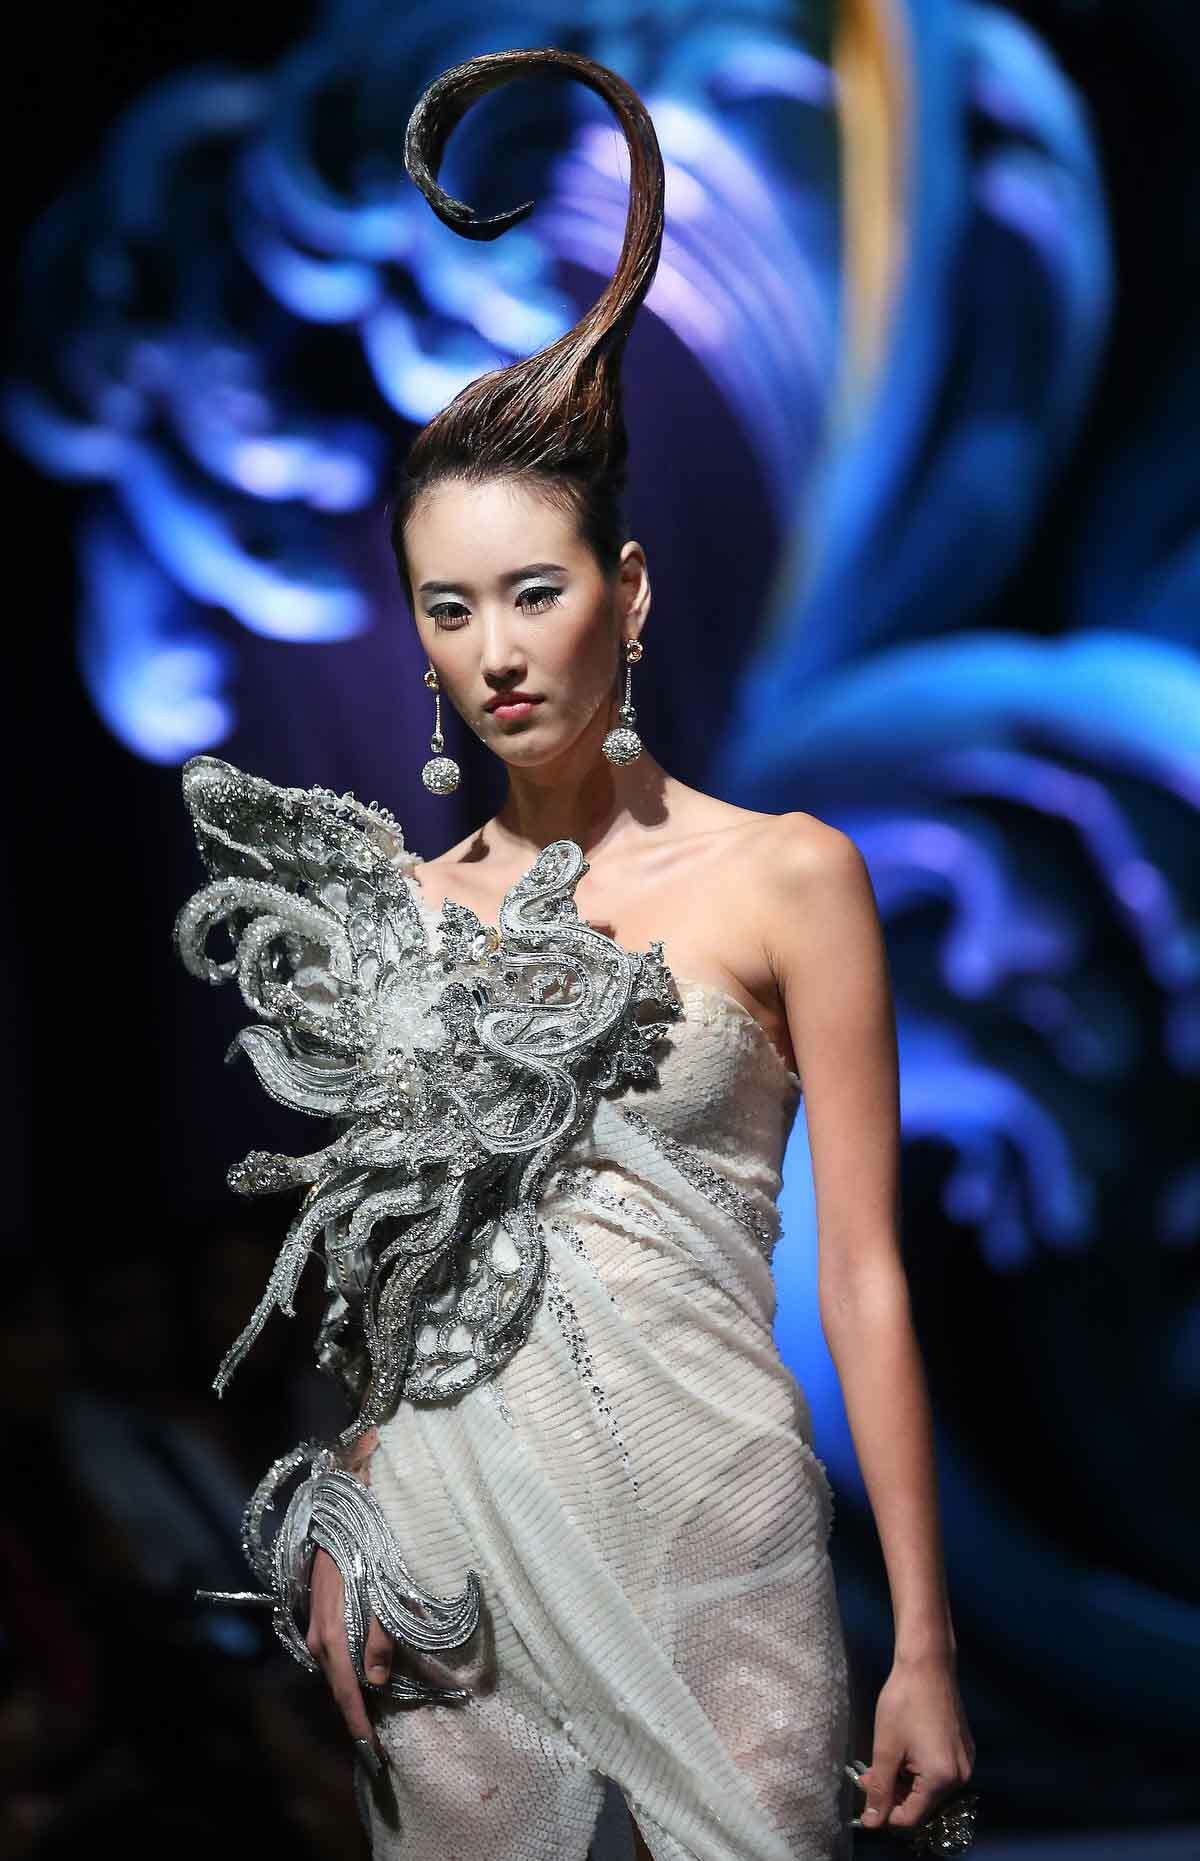 A model showcases a creation by Chinese designer Guo Pei on Tuesday Nov. 27, 2012, in Singapore during the Asian Couture 2012 Singapore fashion show. (AP Photo/Wong Maye-E)